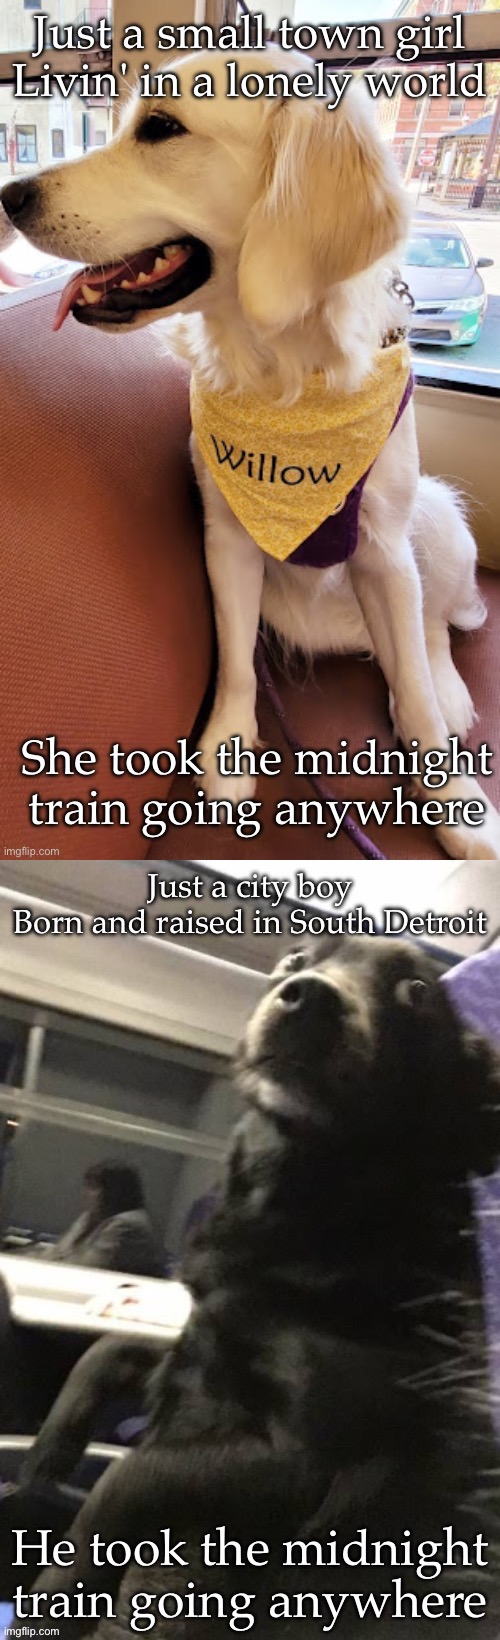 Don’t stop believing | image tagged in journey,train,small,town,city | made w/ Imgflip meme maker